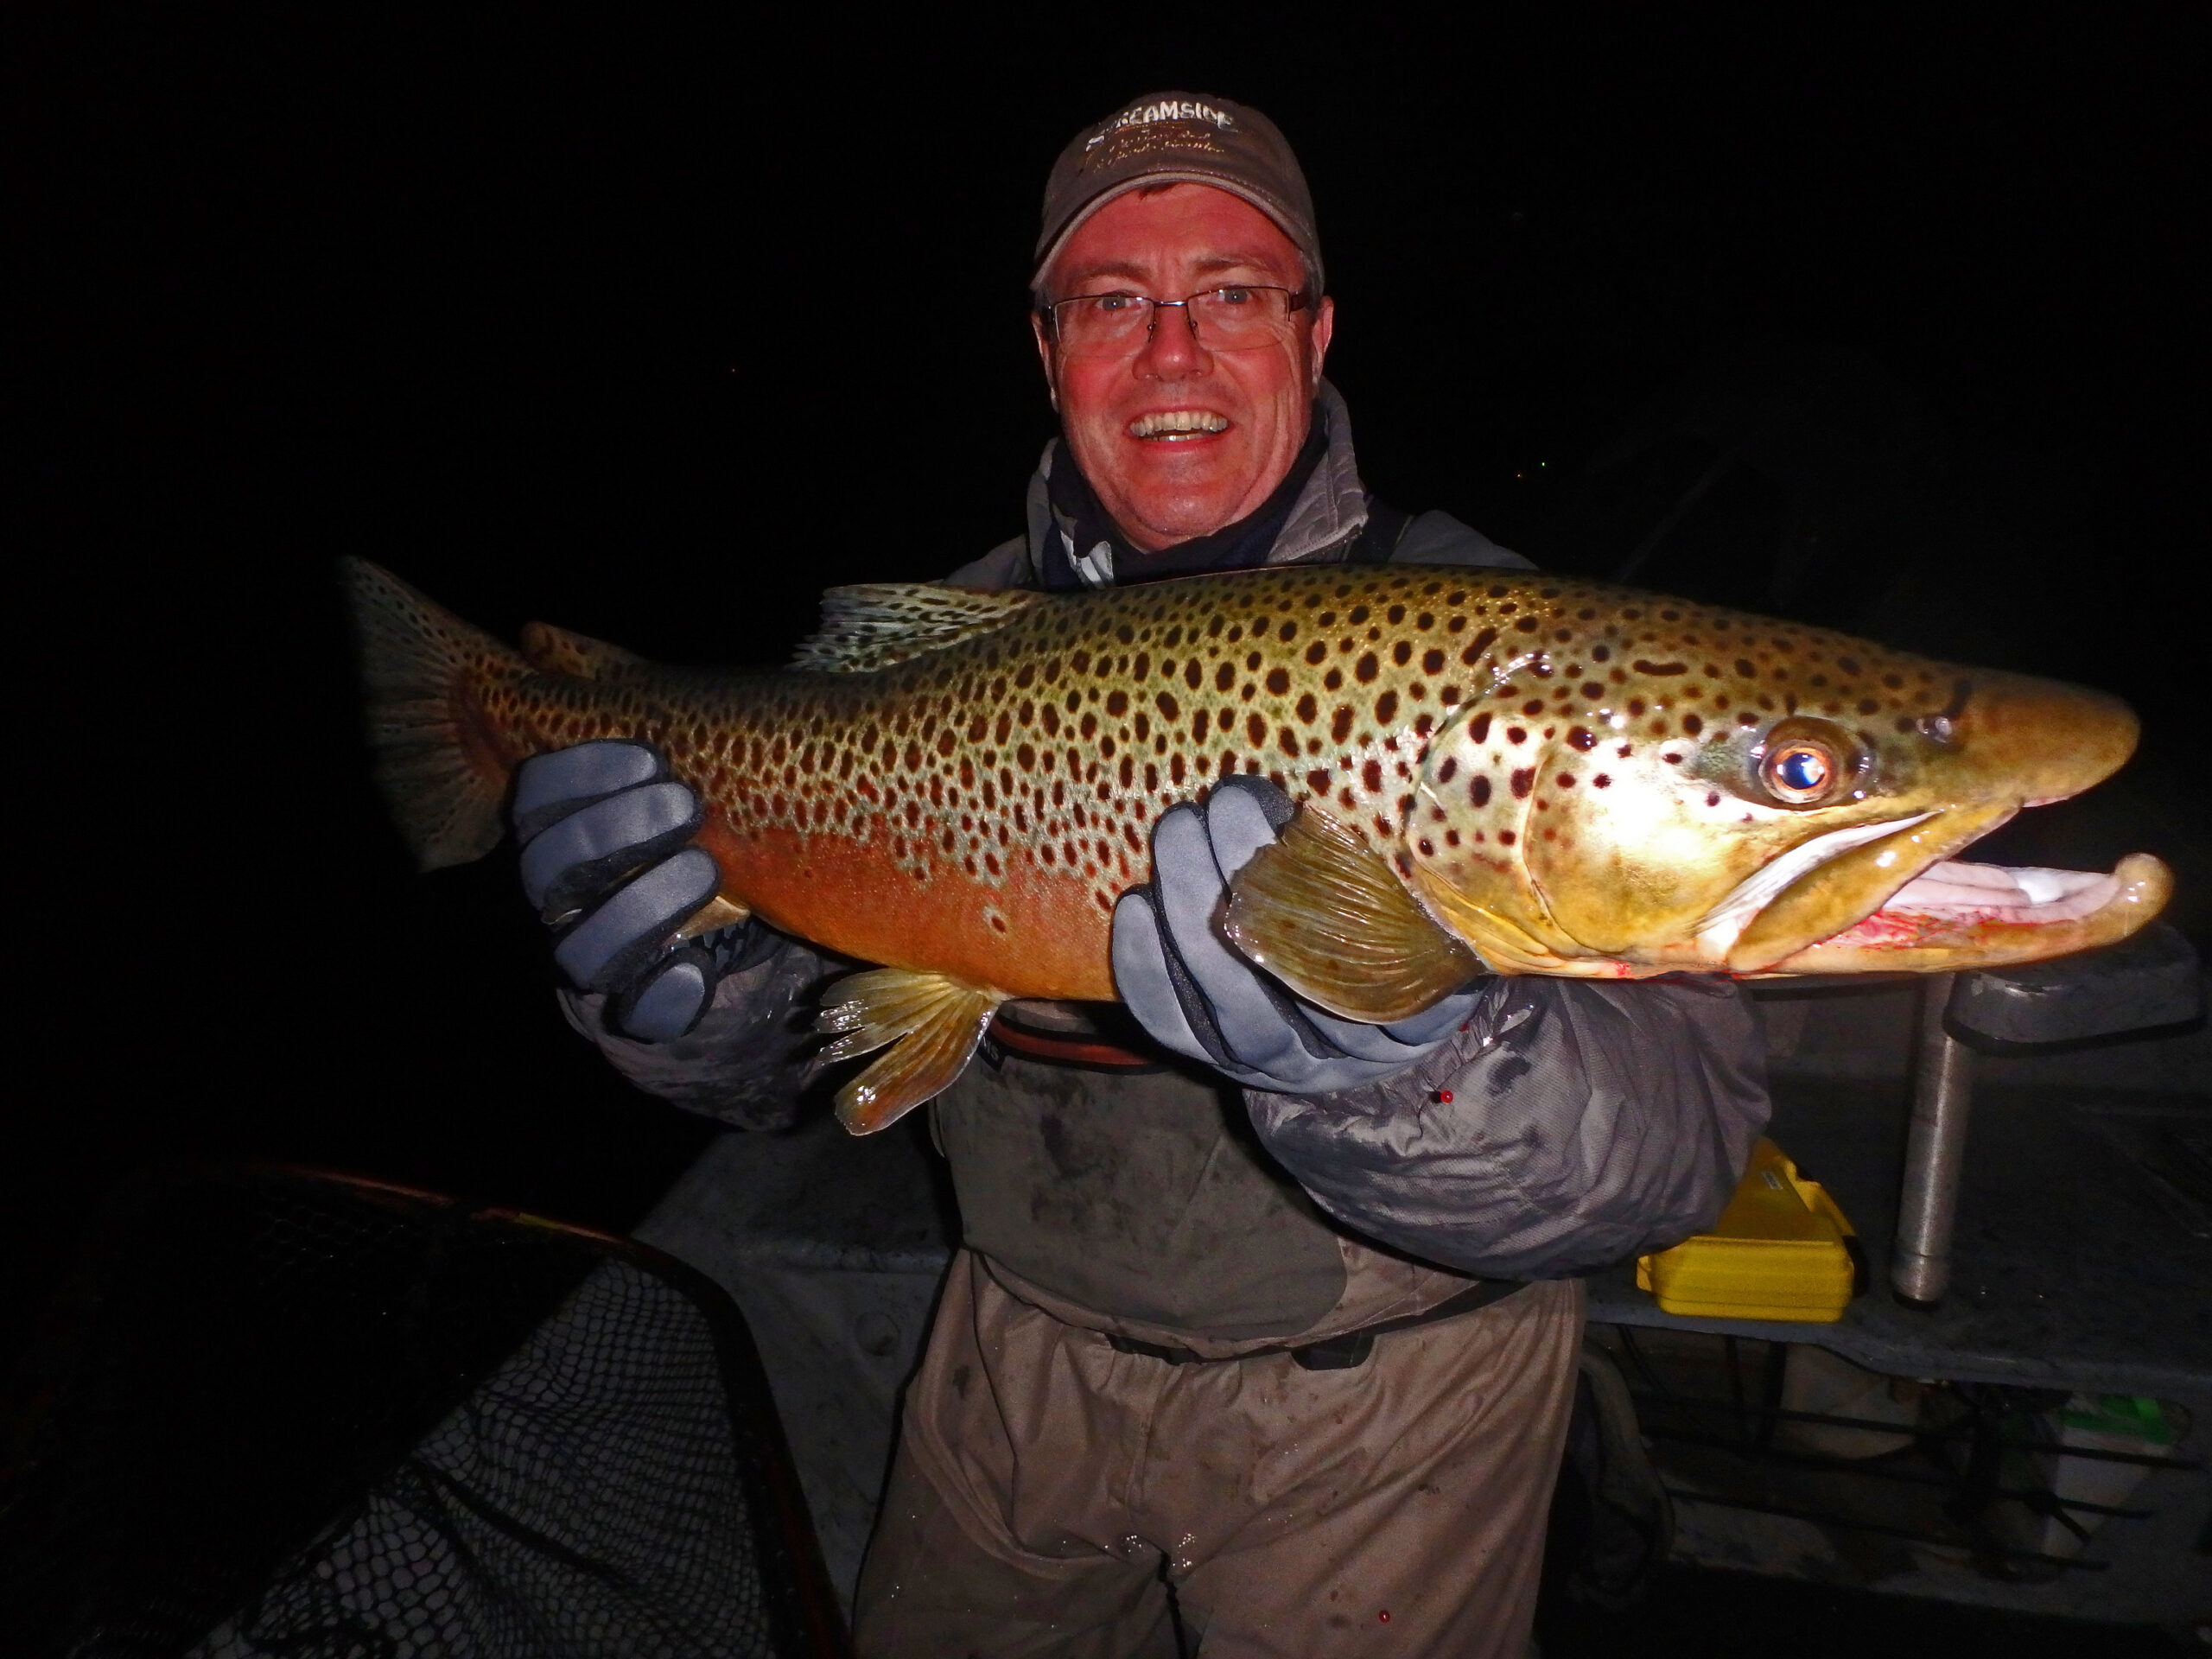 Night Time Is The Right Time For Big Brown Trout - Summer & Winter